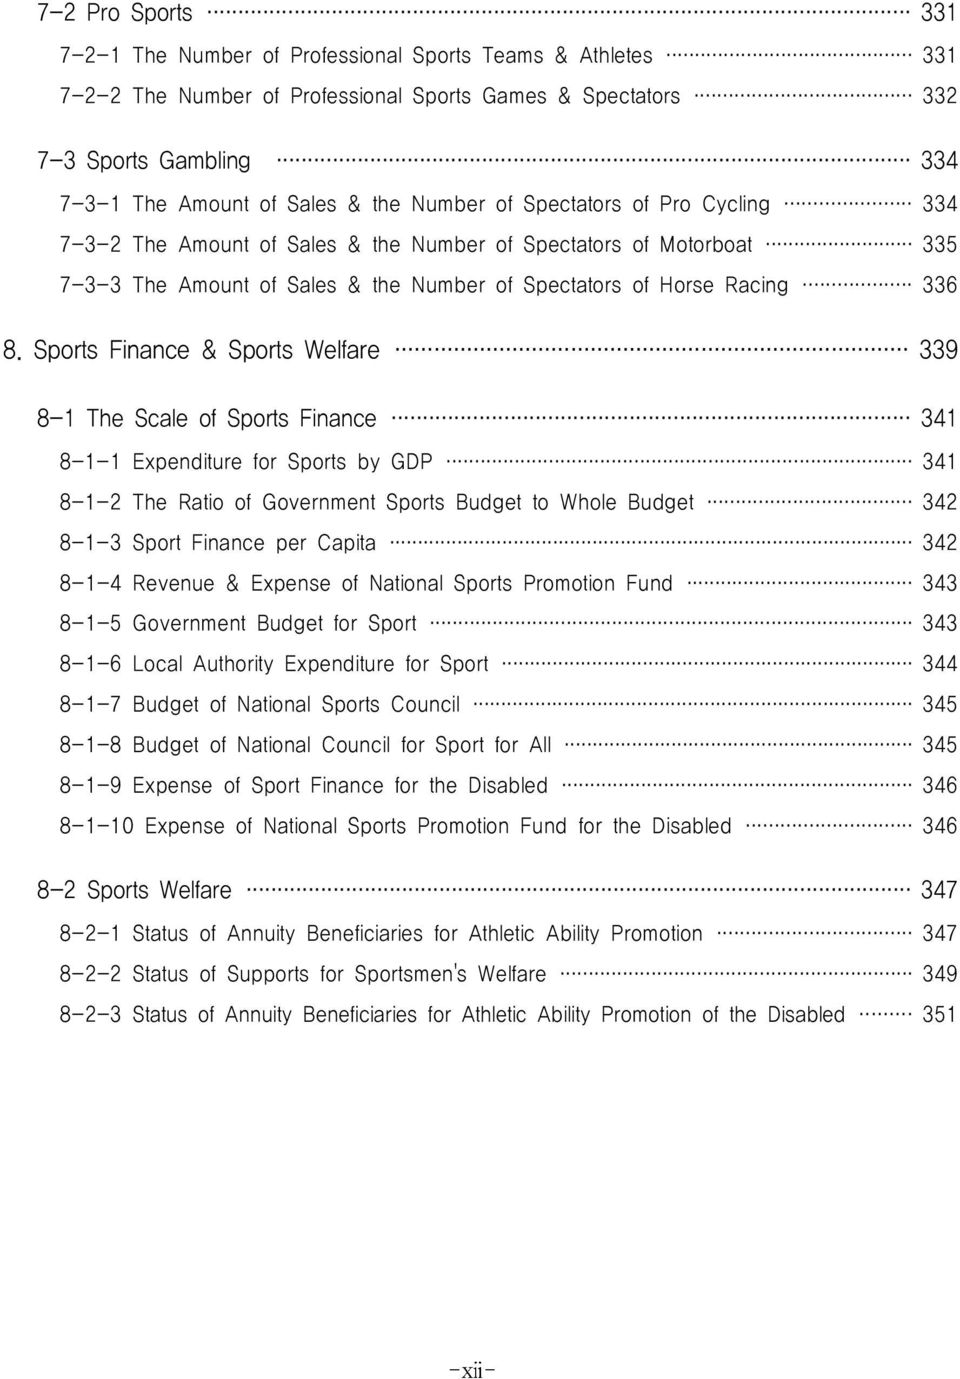 Sports Finance & Sports Welfare 339 8-1 The Scale of Sports Finance 341 8-1-1 Expenditure for Sports by GDP 341 8-1-2 The Ratio of Government Sports Budget to Whole Budget 342 8-1-3 Sport Finance per